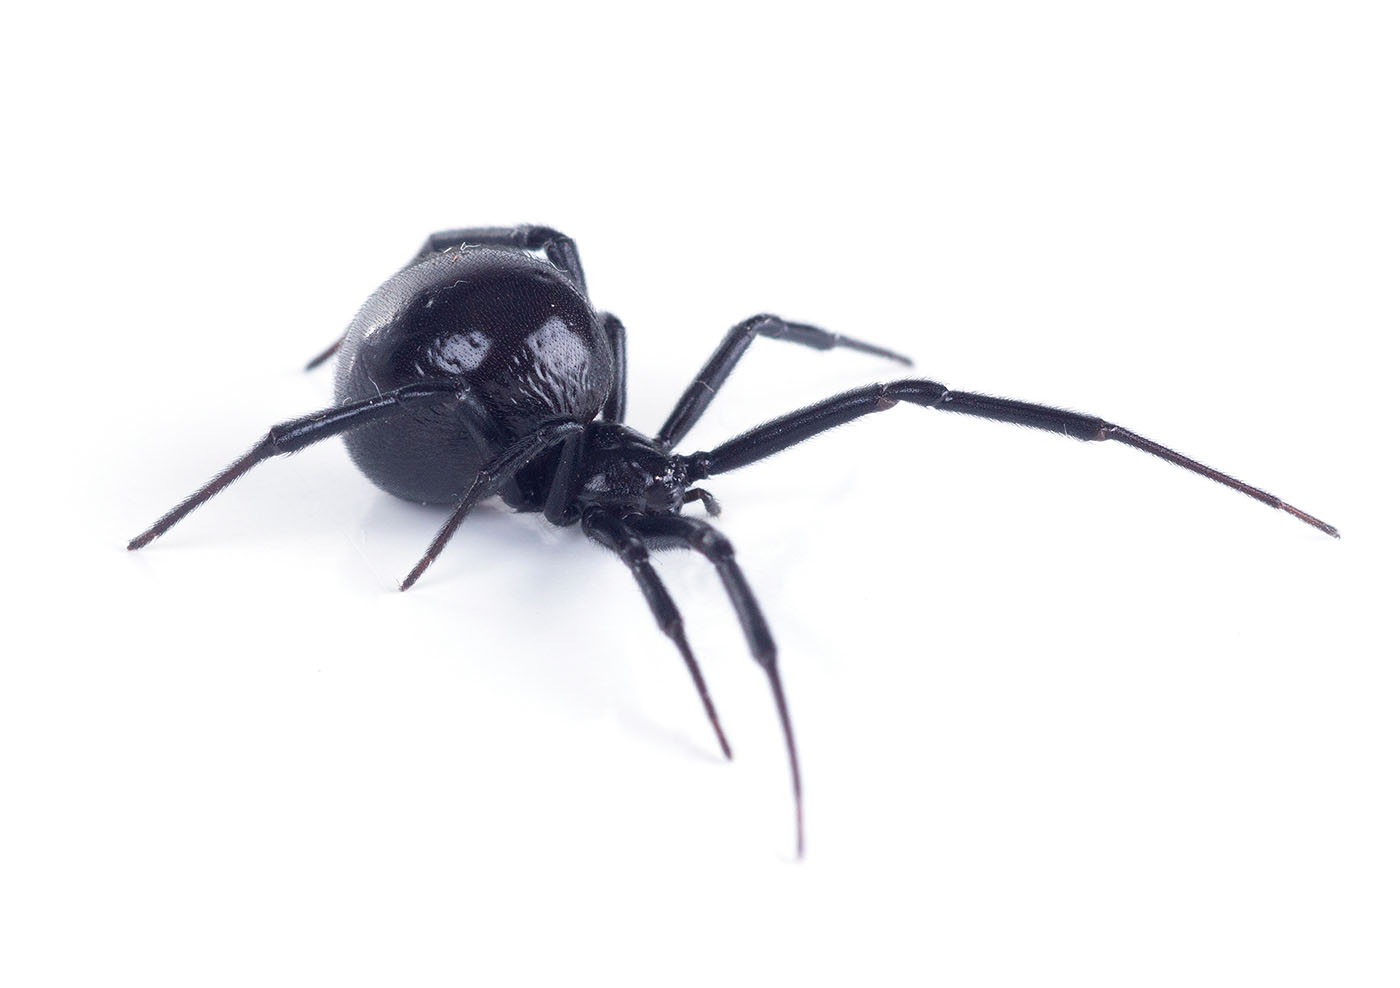 A black spider - contact GGA Pest Management Waco for expert spider identification.